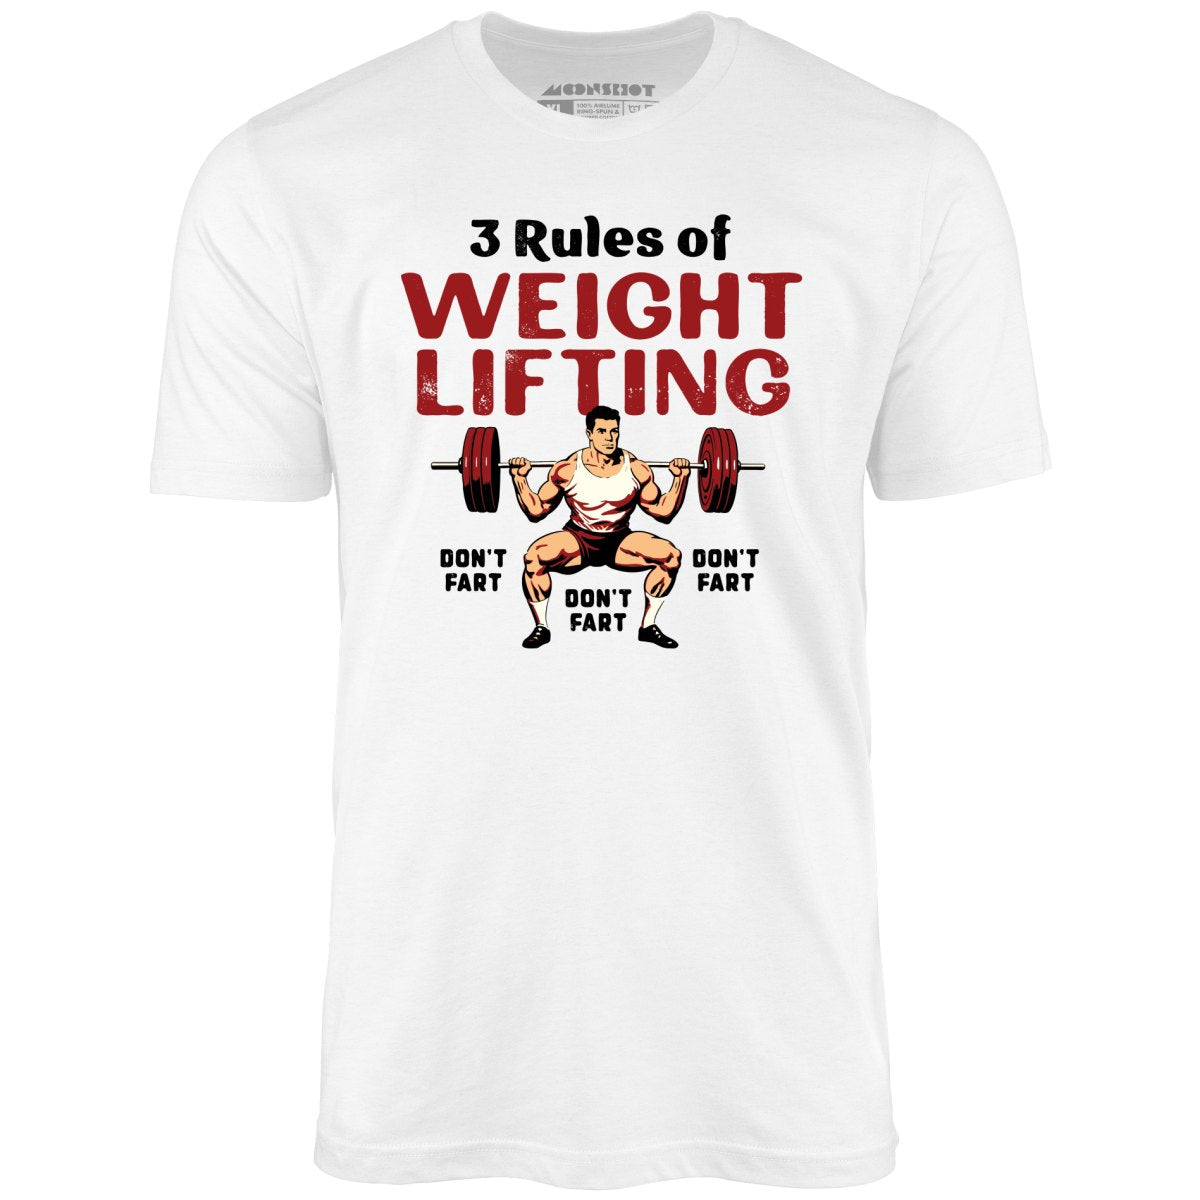 3 Rules of Weightlifting - Unisex T-Shirt